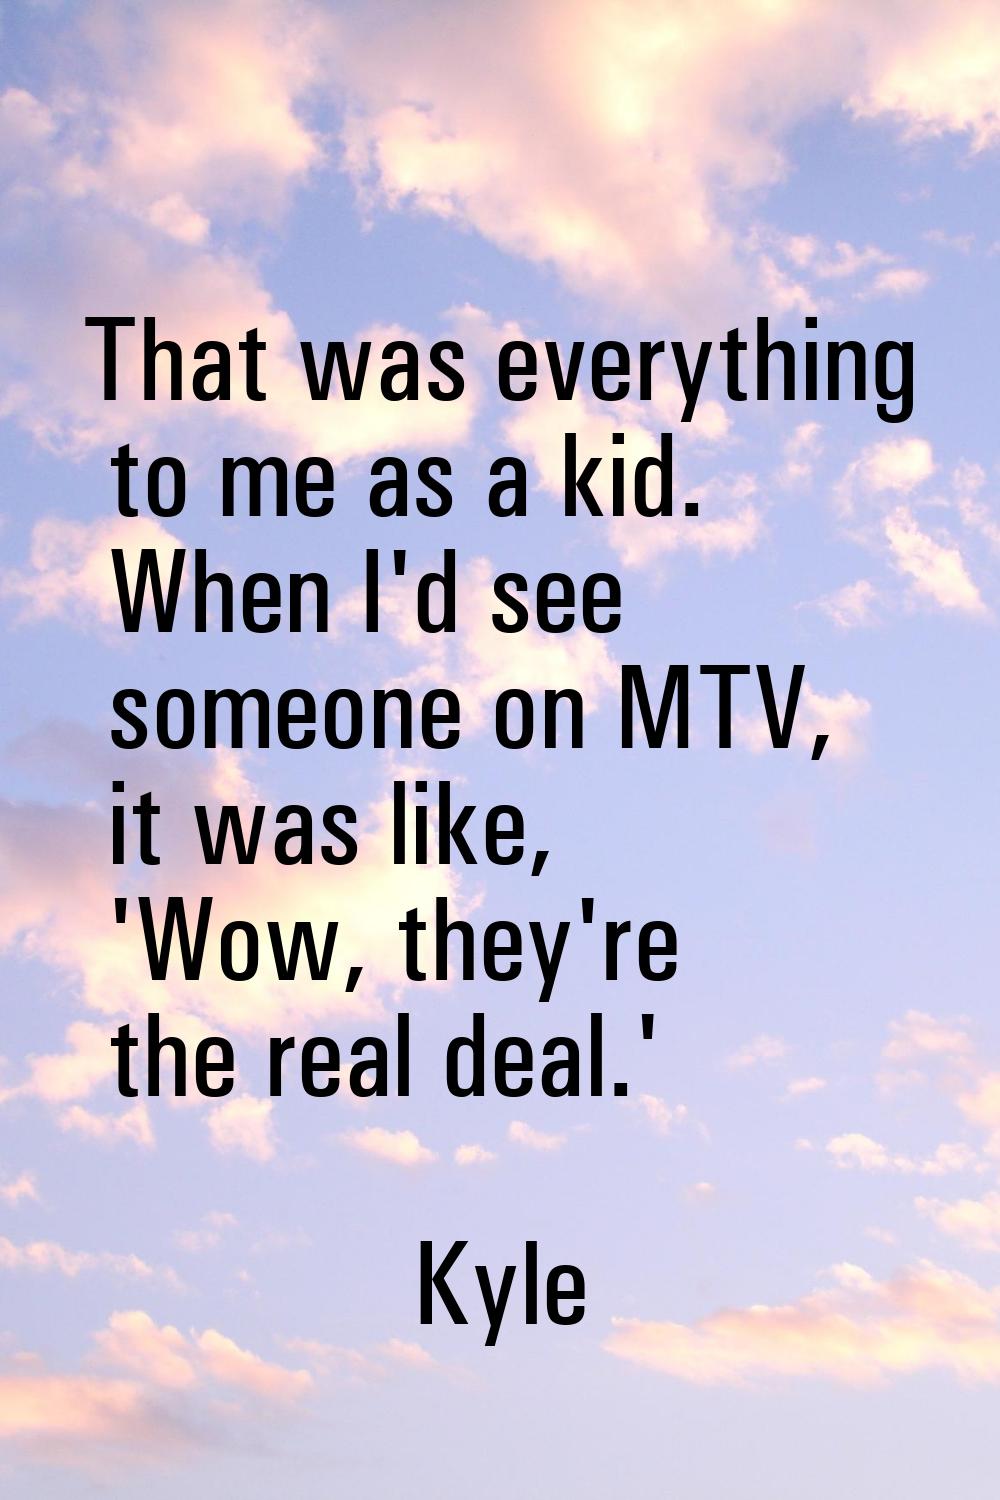 That was everything to me as a kid. When I'd see someone on MTV, it was like, 'Wow, they're the rea